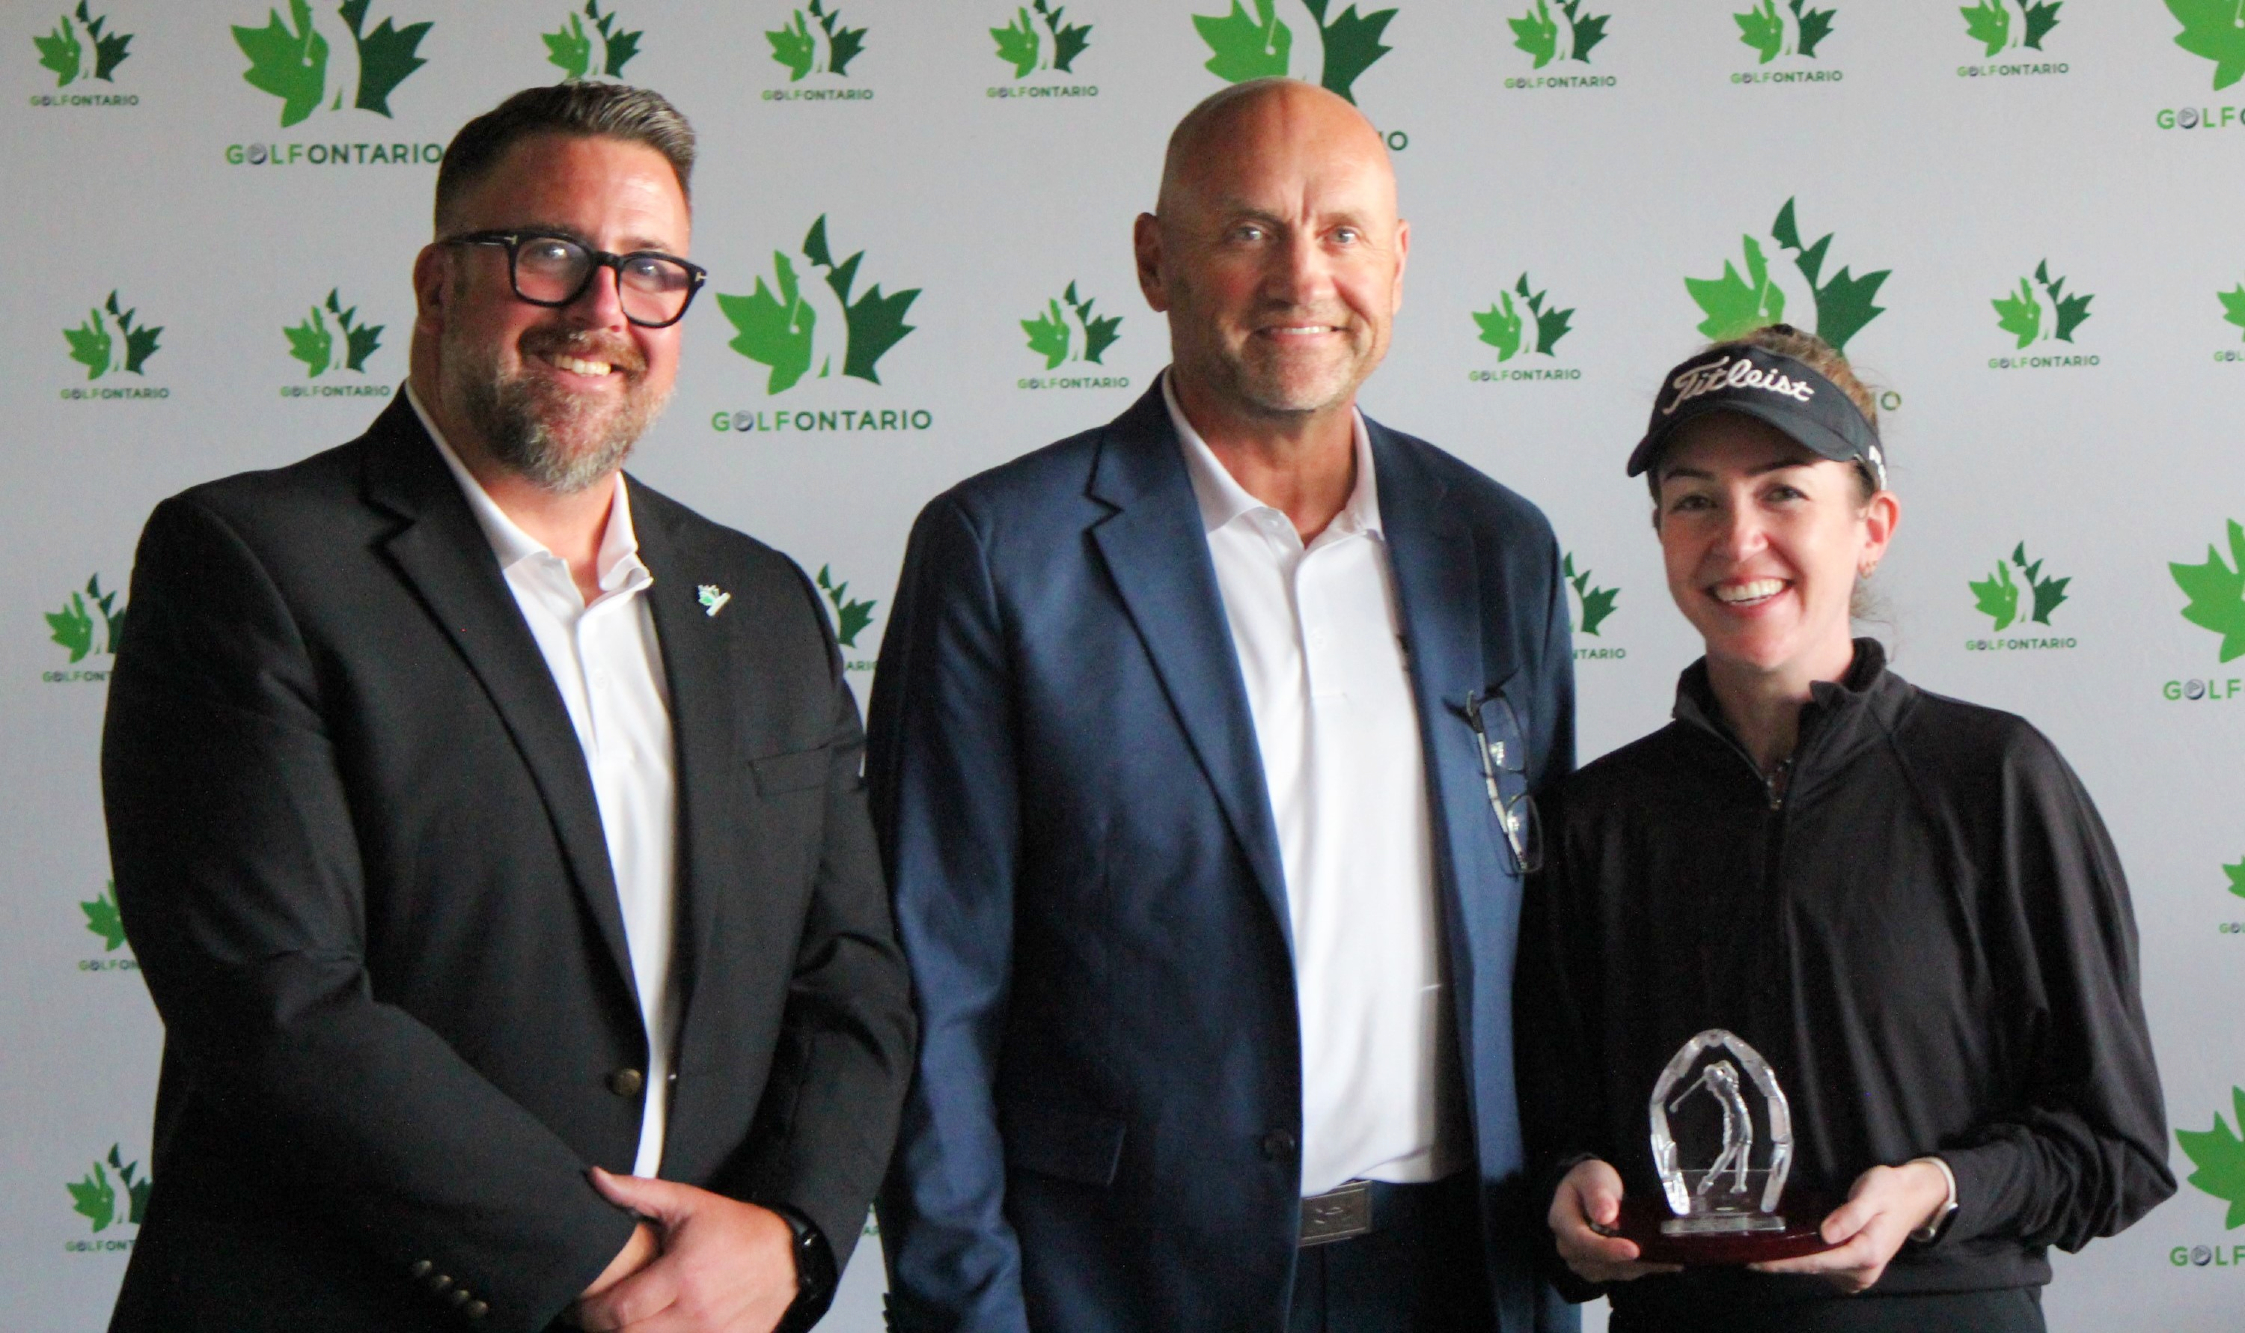 Georgetown golfer wins low net title at Ontario championship